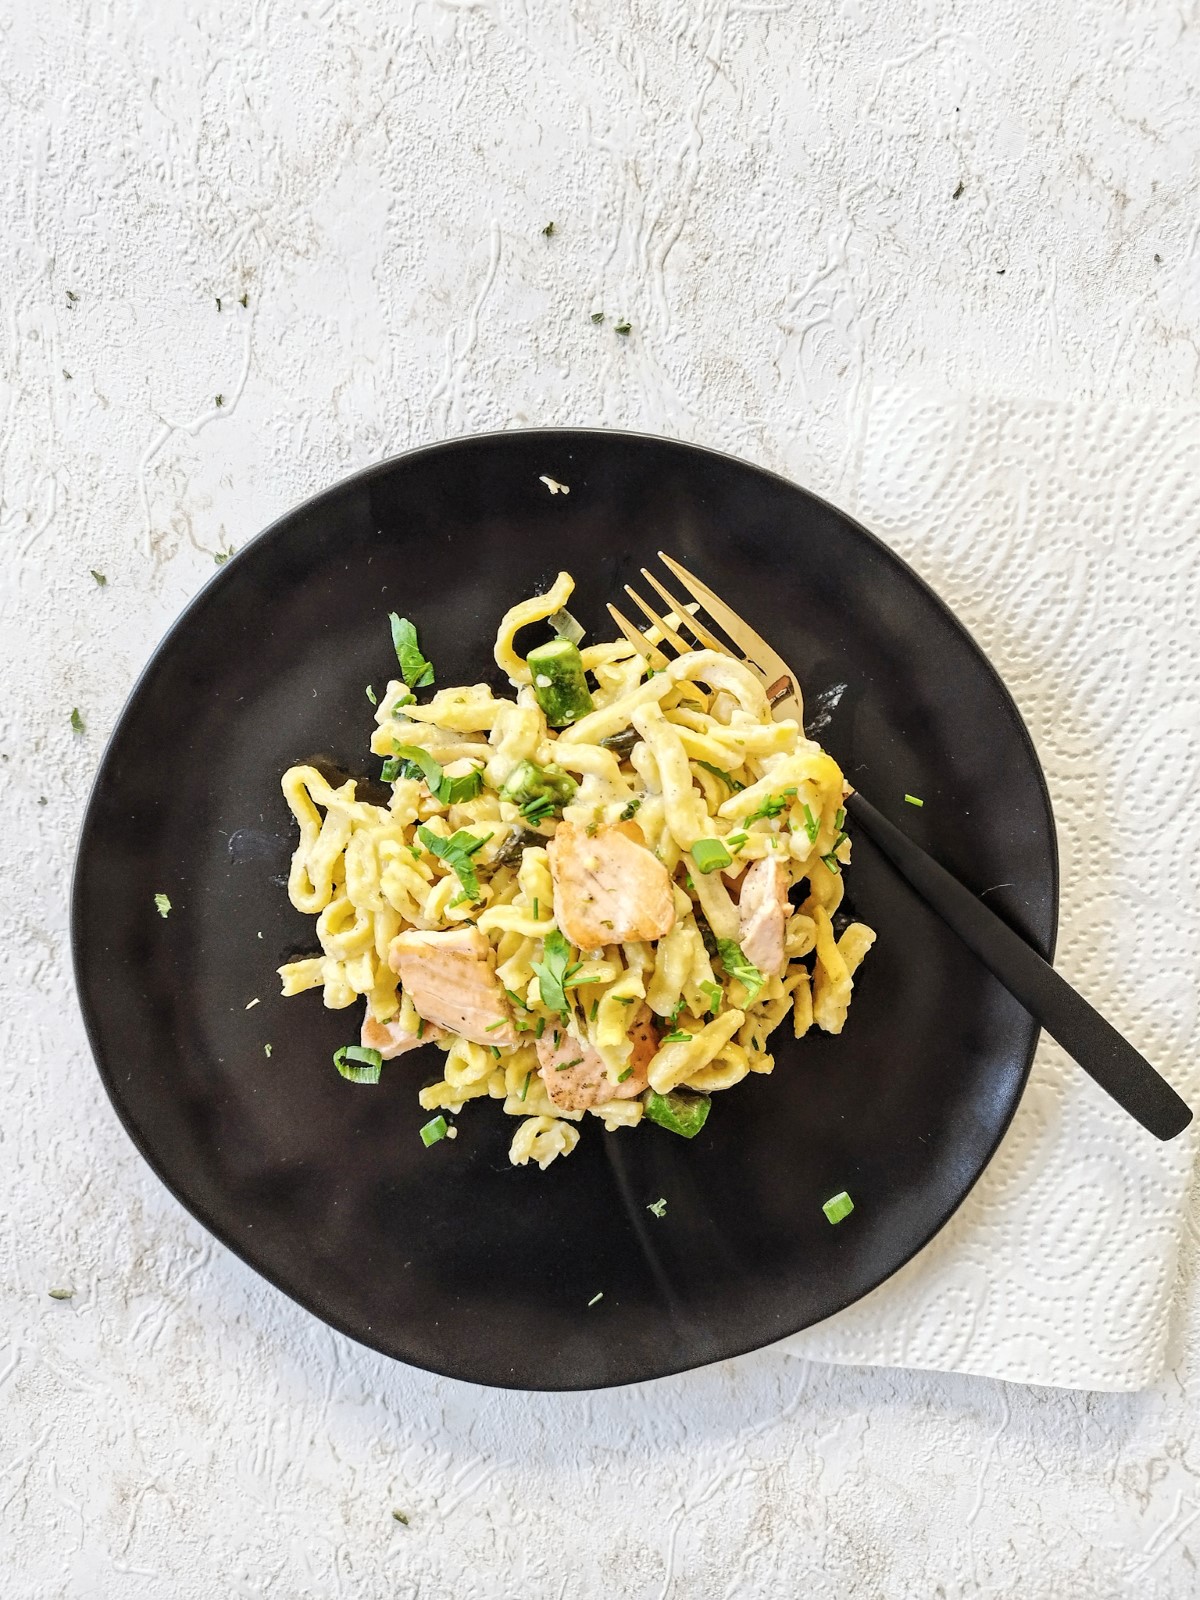 Asparagus with salmon and spätzle (egg noodles) are delicious, and light spring lunch. 